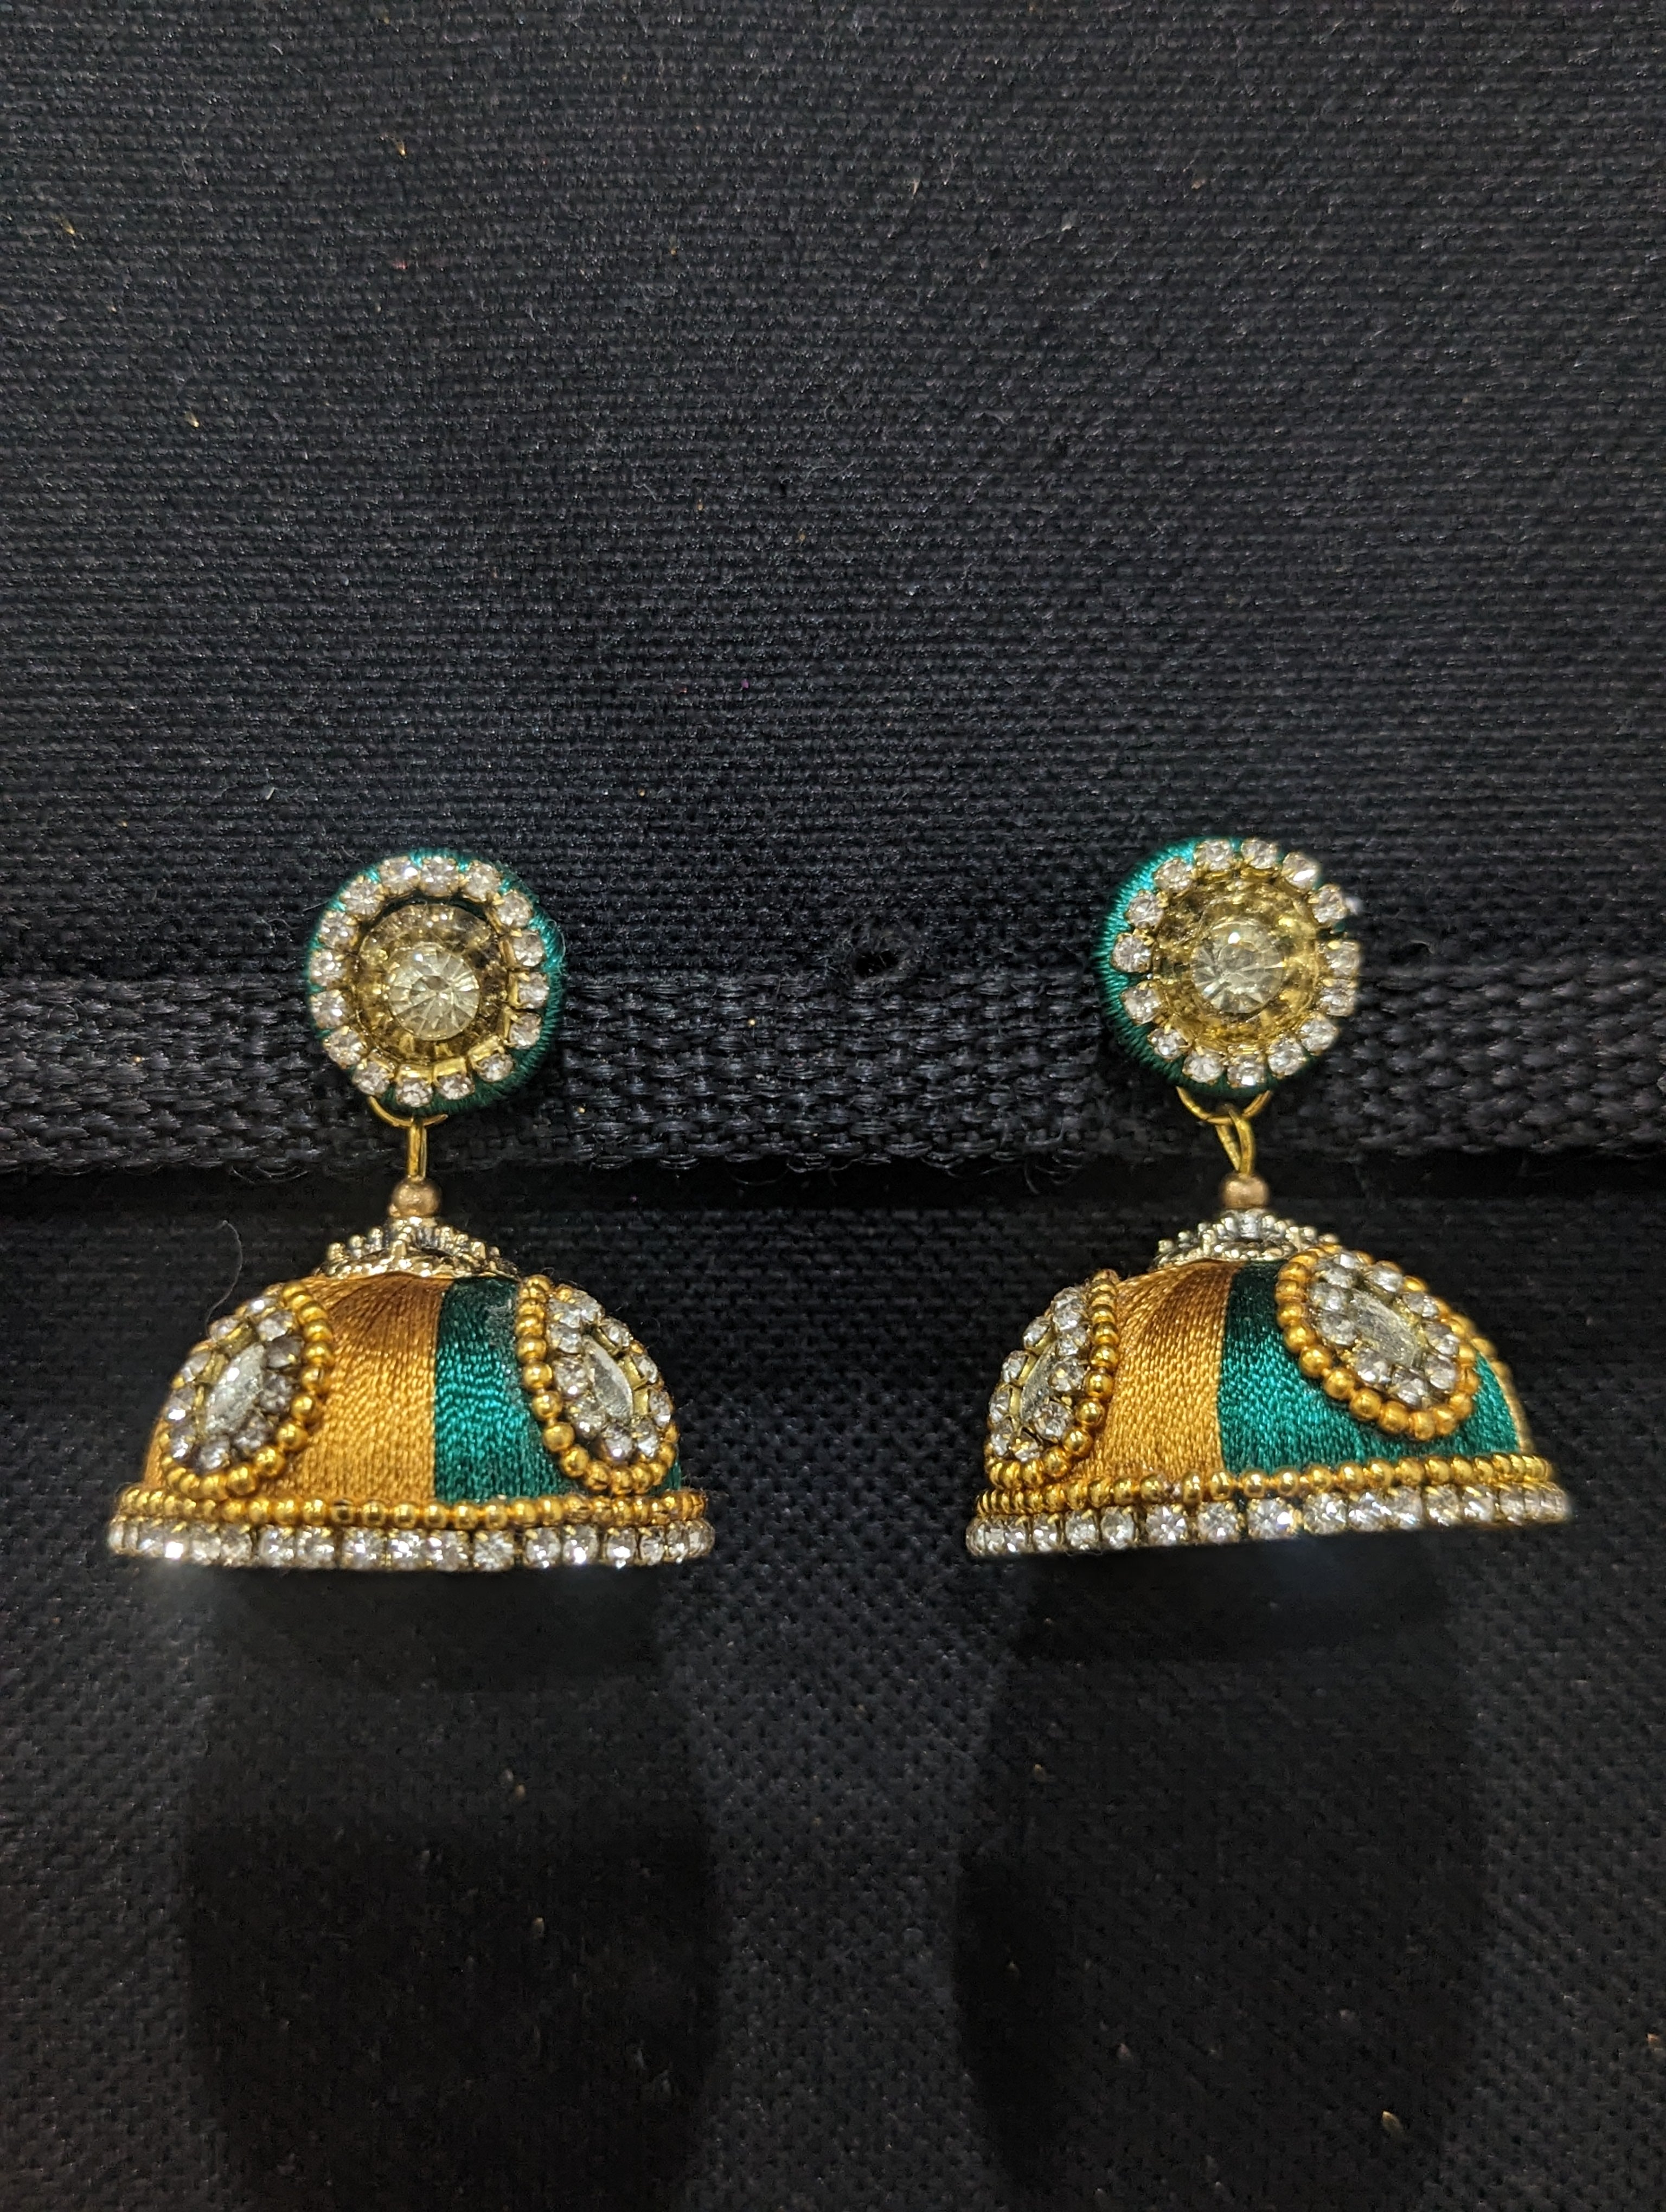 Shop Thread Earrings Online In India at Best Price  JewelMazecom